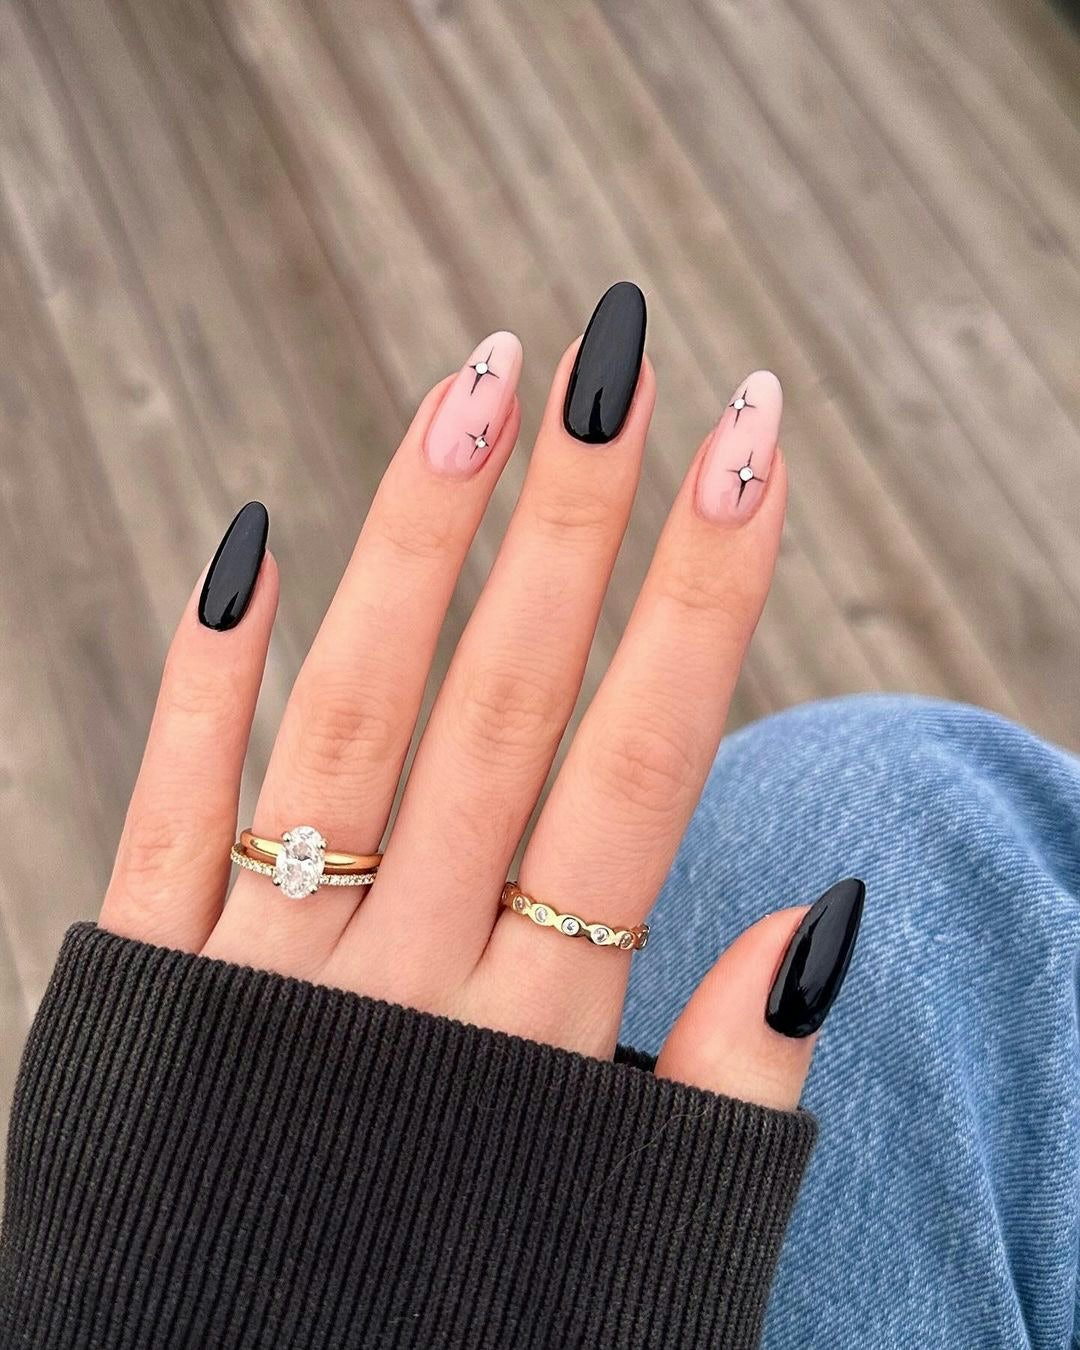 50 Winter Nails For 2023 - Brit + Co